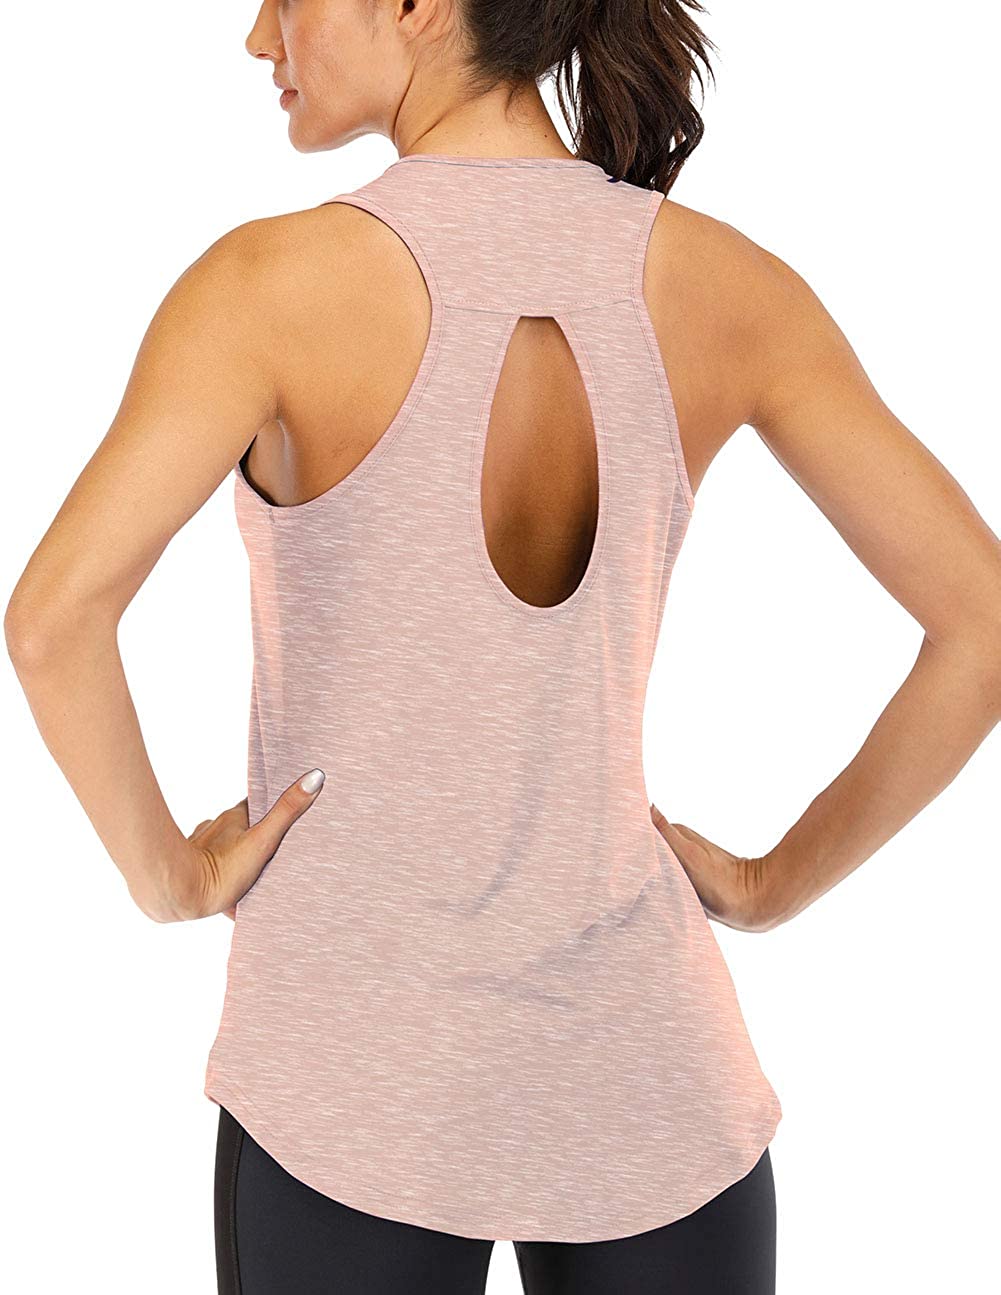 Fihapyli ICTIVE Workout Cropped Tank Tops for Women Flowy Sleeveless Mesh Back Athletic Muscle Shirt Loose Fit Cute Crop Cami 